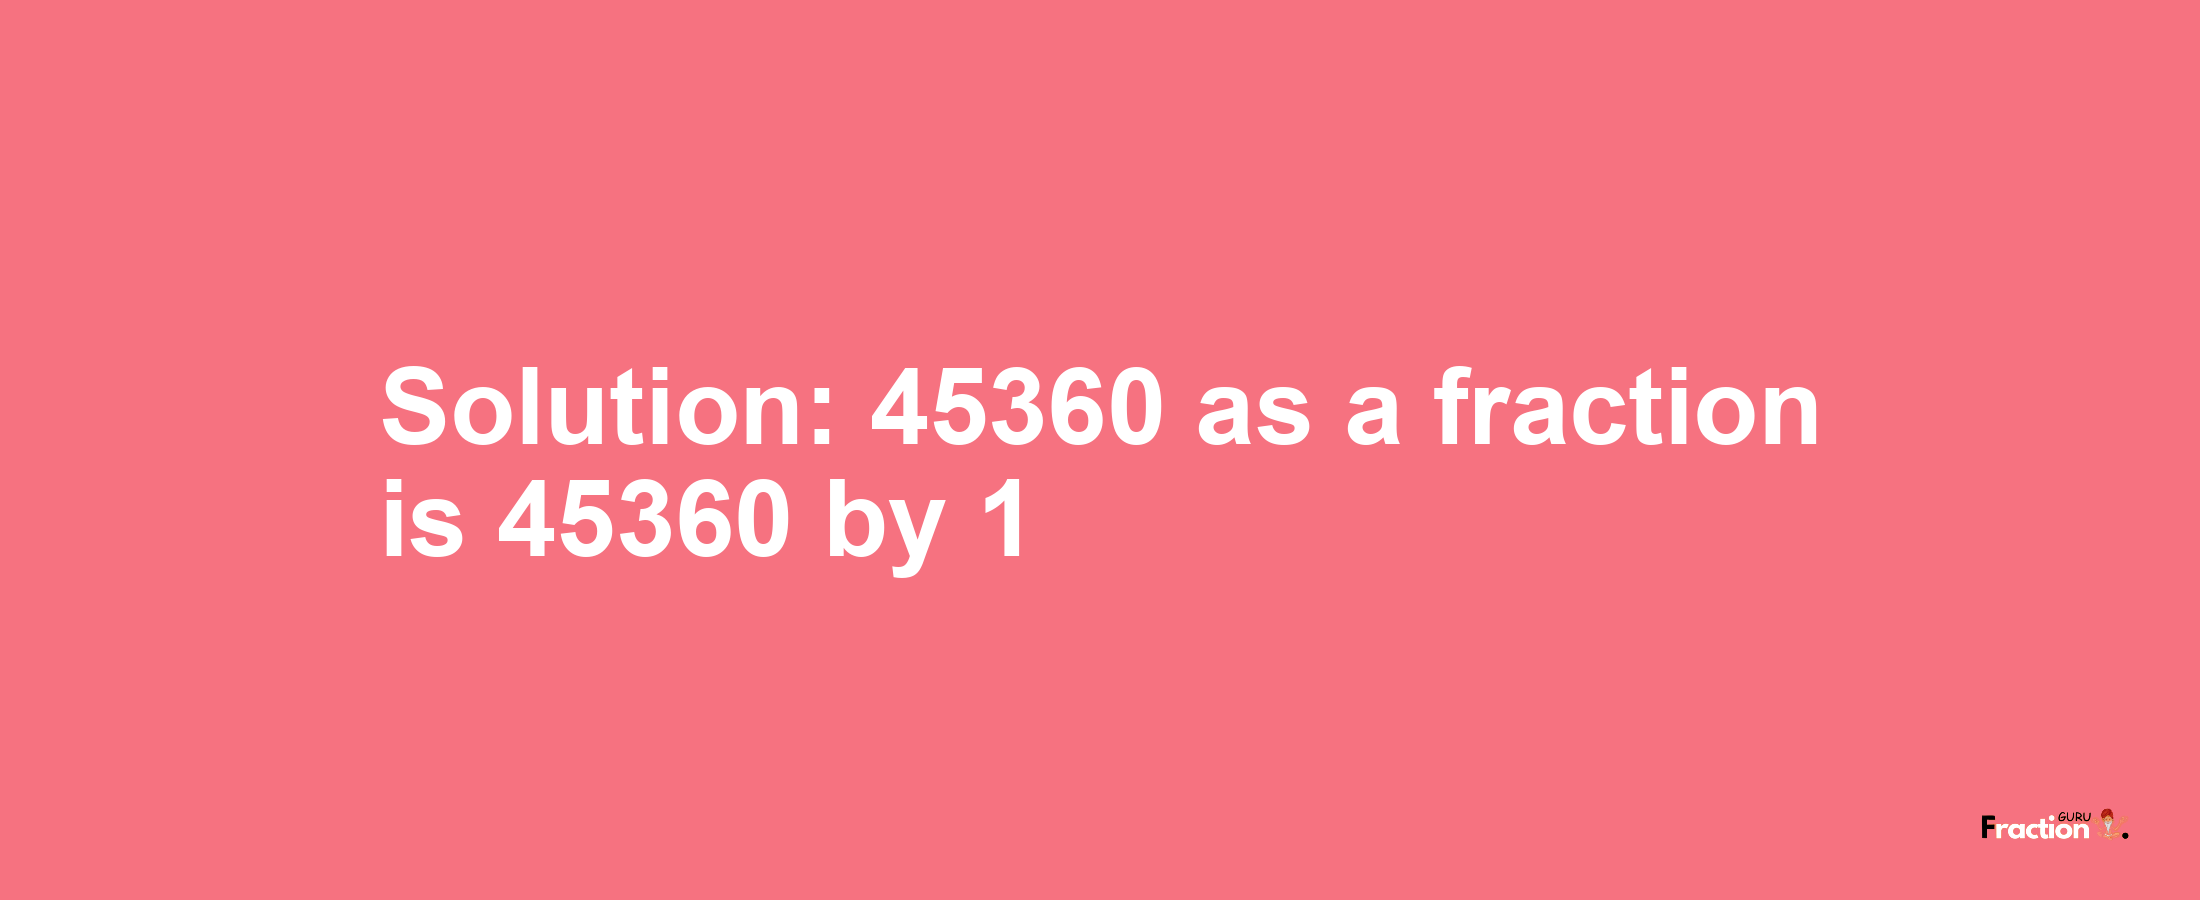 Solution:45360 as a fraction is 45360/1